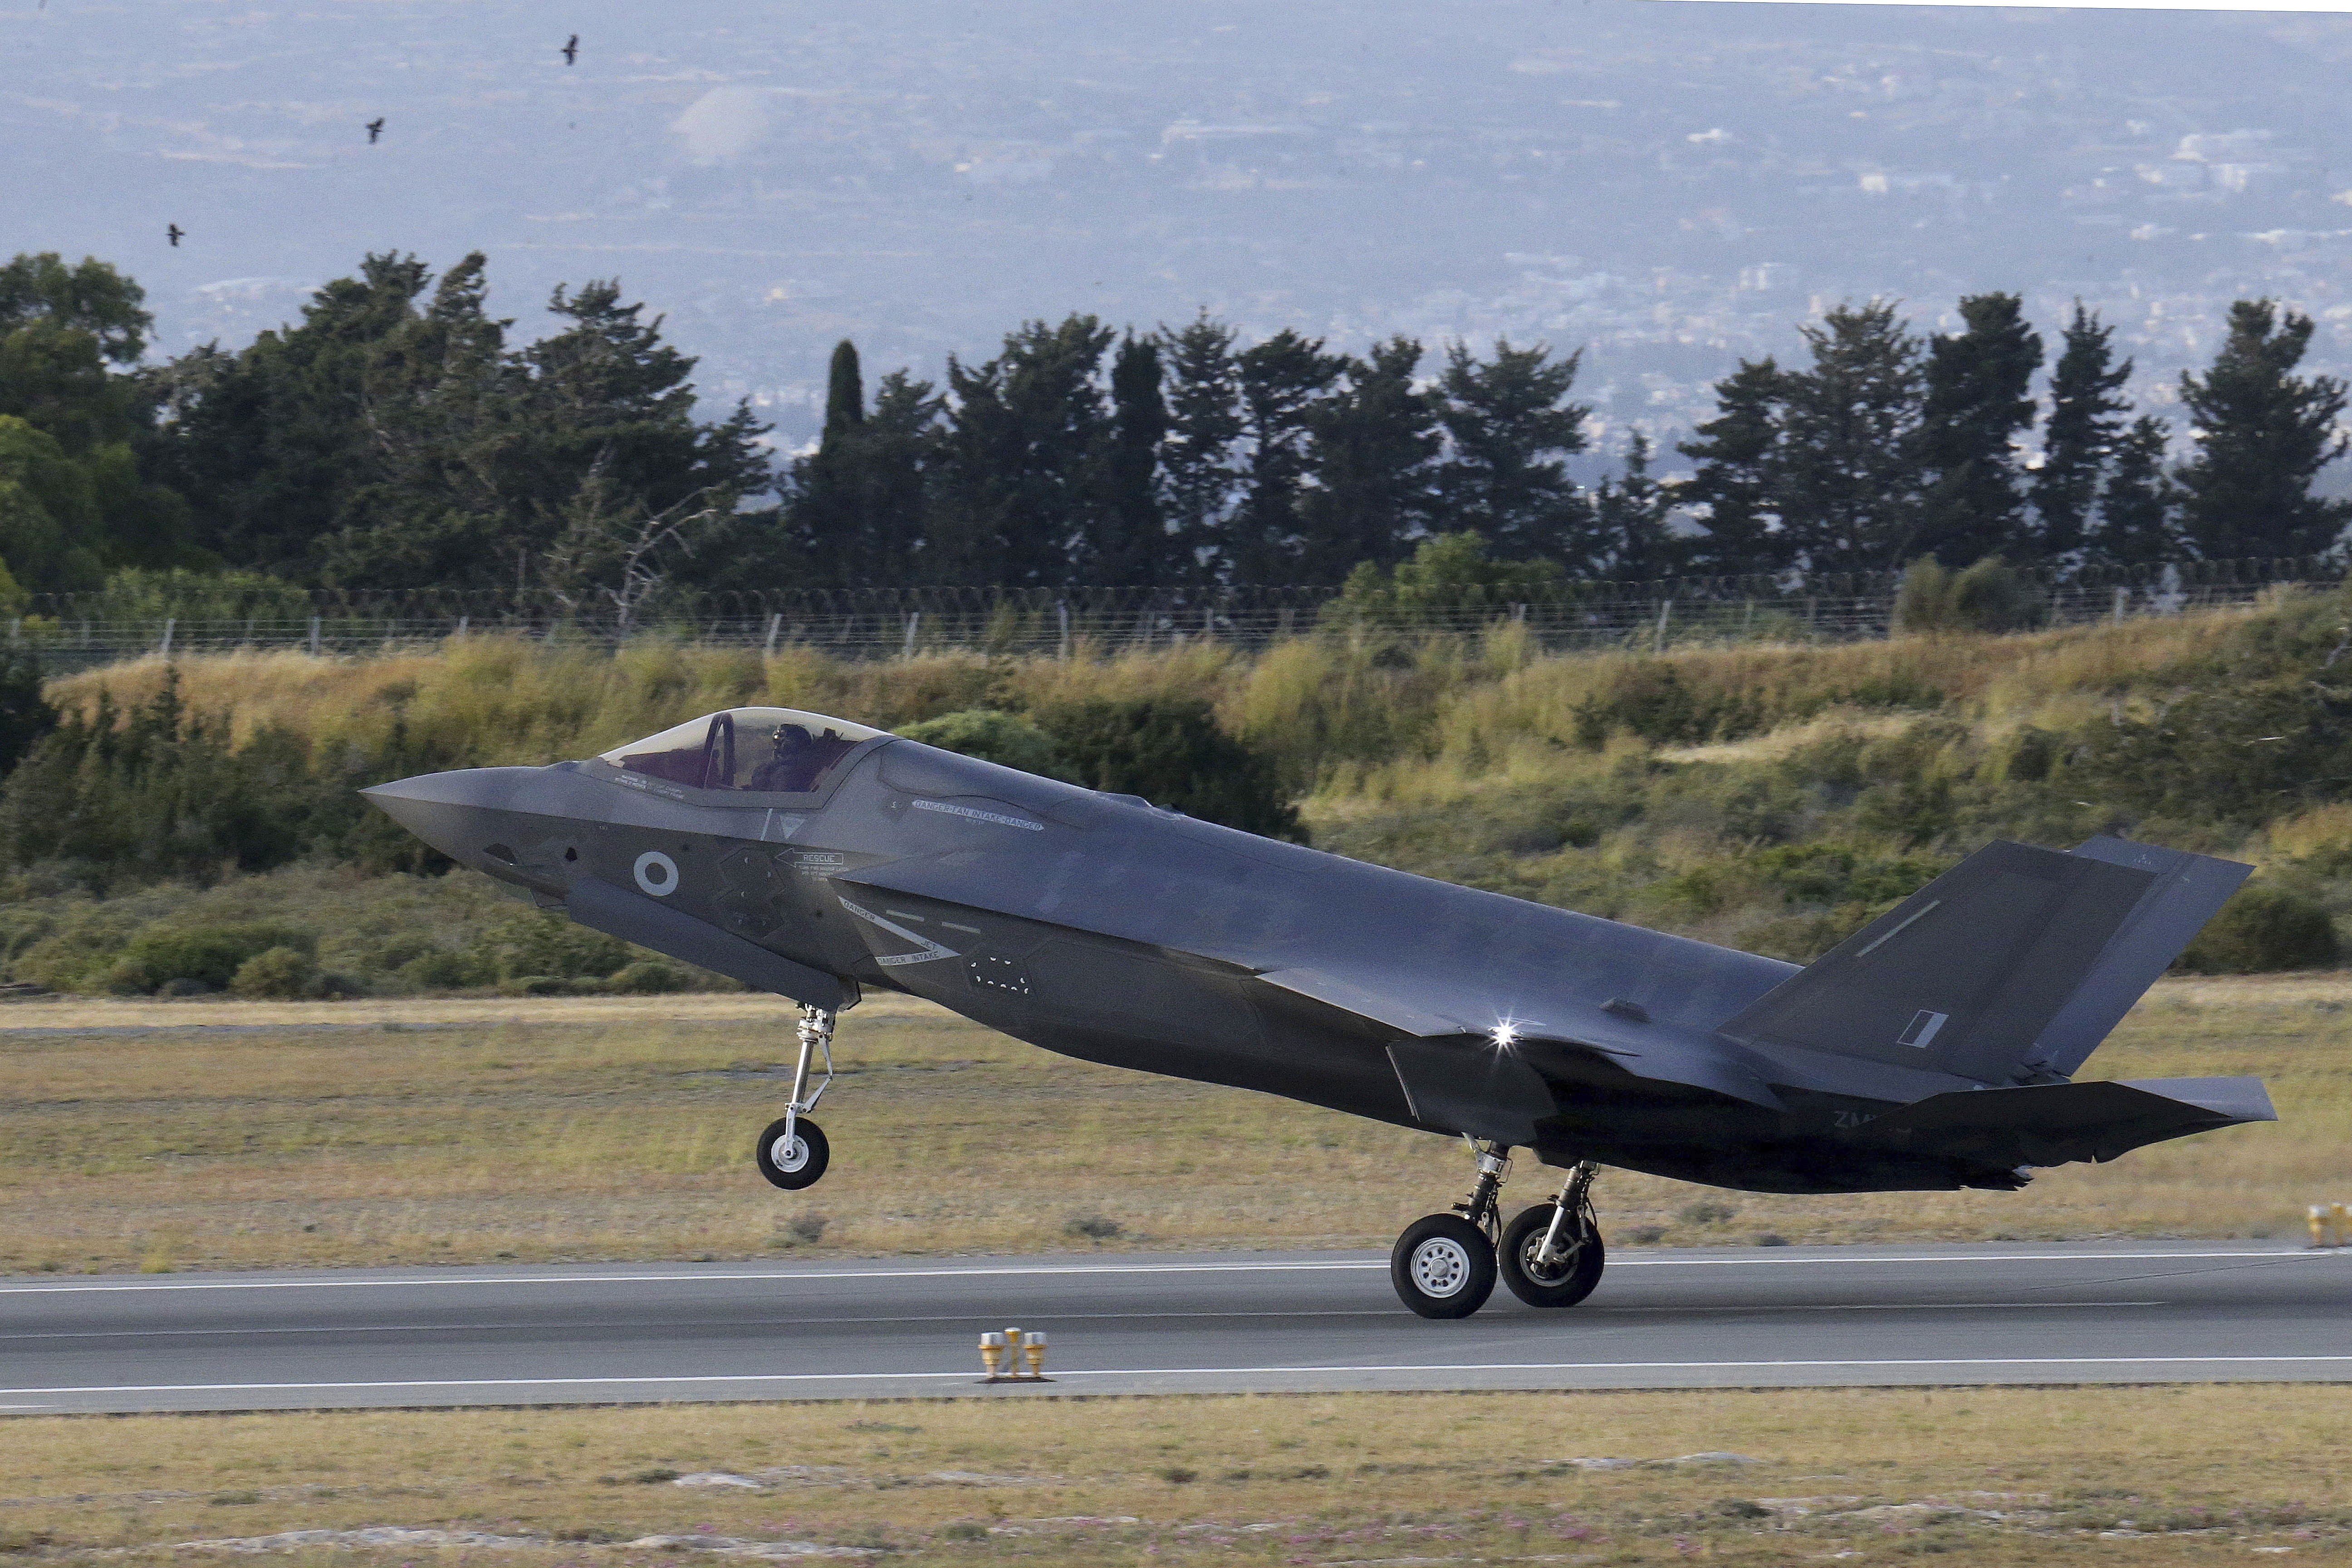 Japan’s defence spending is expected to set a record next year as the country buys expensive American weapons amid threats from China and North Korea. Among the biggest purchases are six F-35B stealth fighters at 14 billion yen each for deployment in 2024. Photo: AP